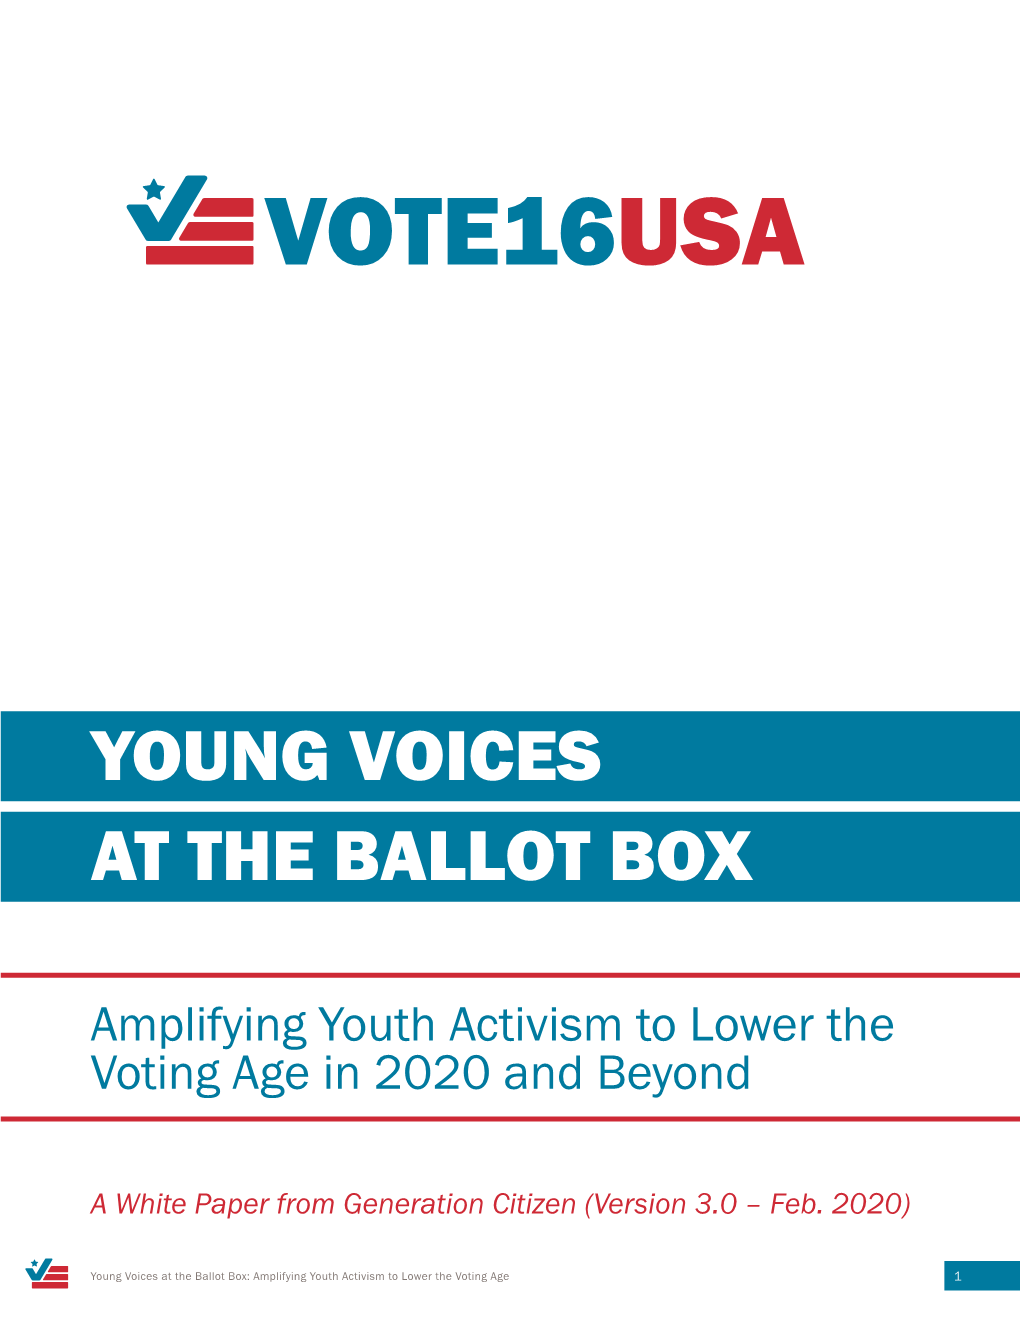 The 2020 White Paper "Young Voices at the Ballot Box"